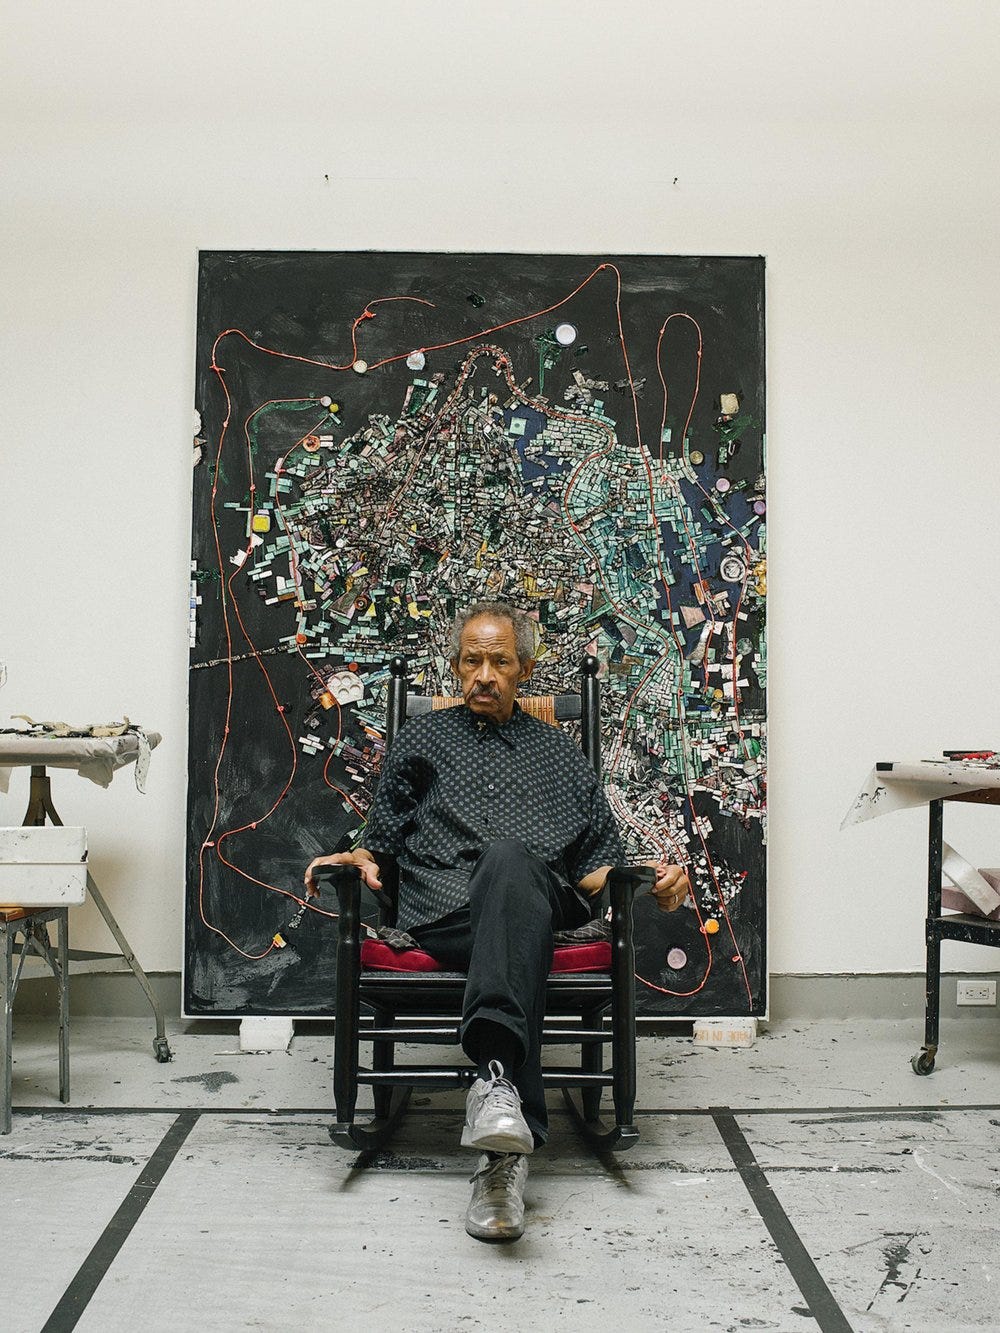 A Memory of Jack Whitten — Humor and the Abject